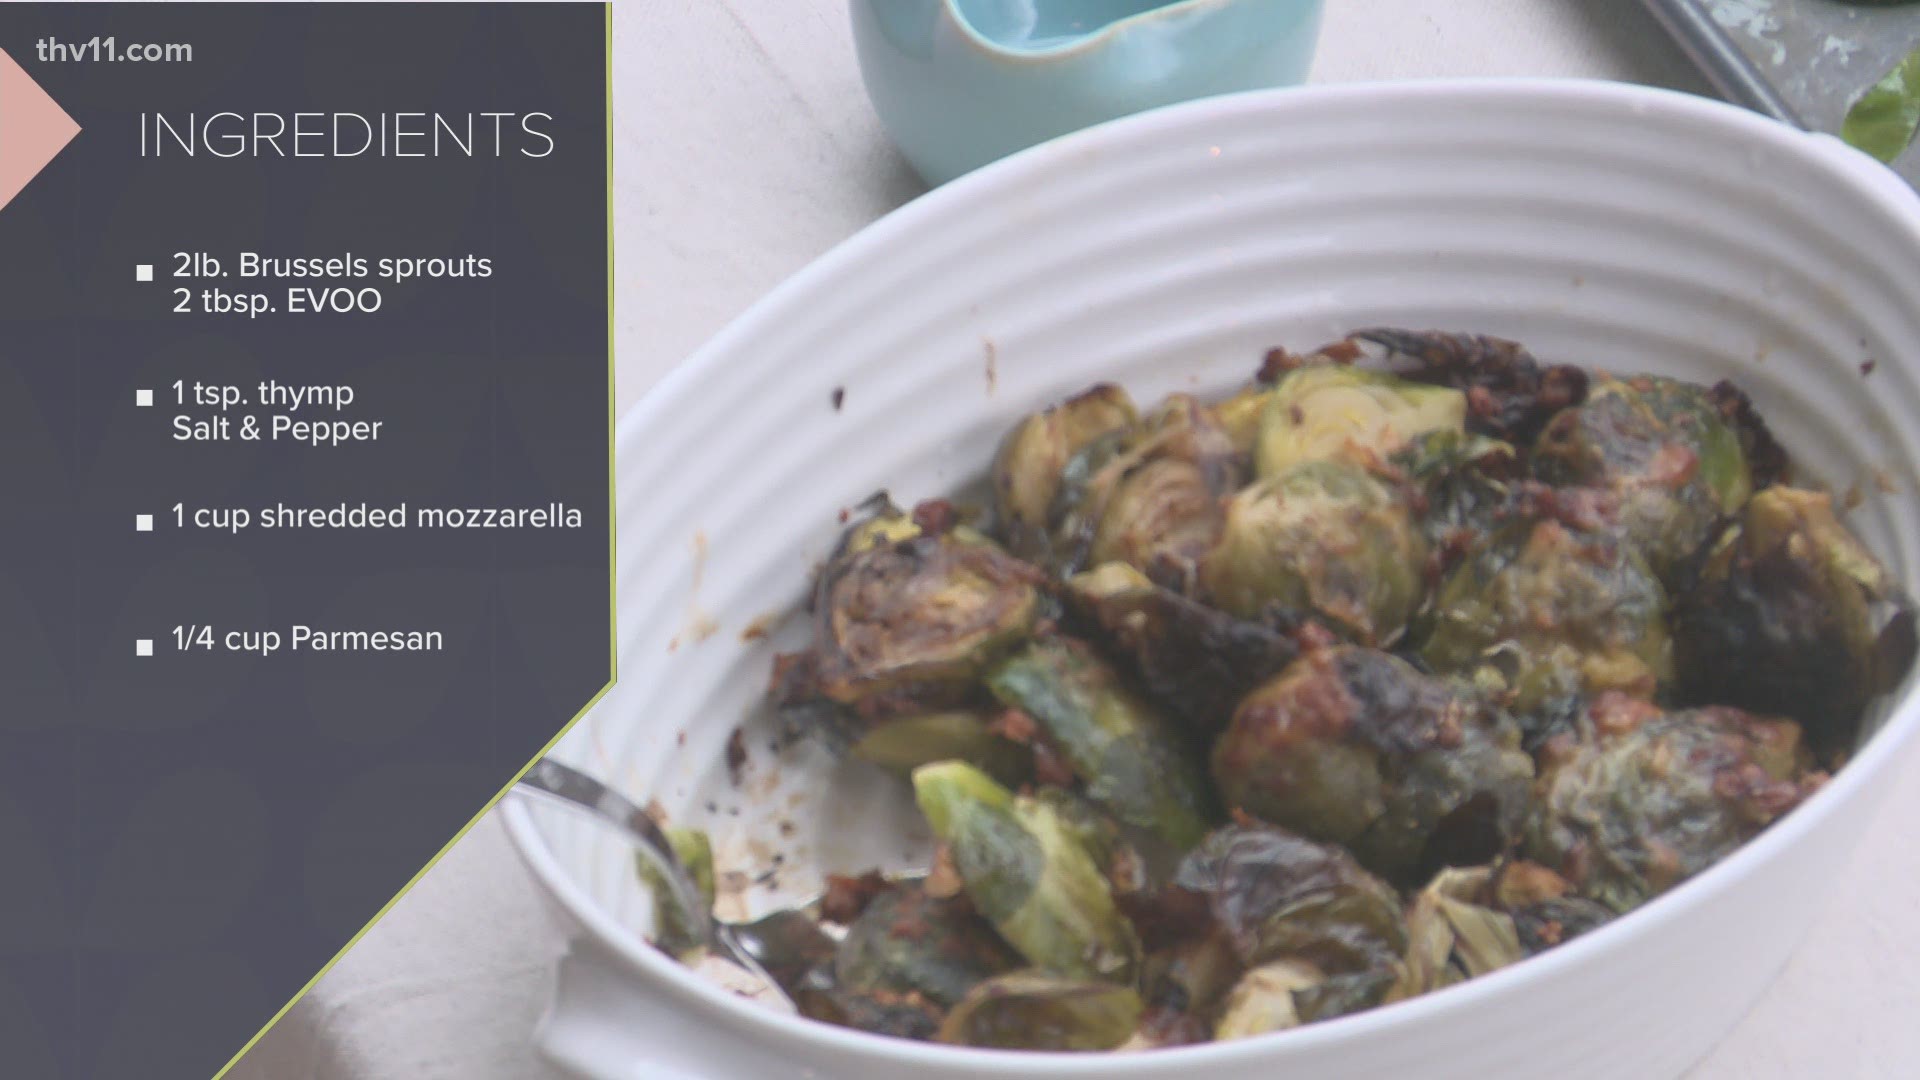 Denise Albert with Cooking in Bloom shares a recipe in time for St. Patrick’s Day that just might get your kids to eat Brussels sprouts.